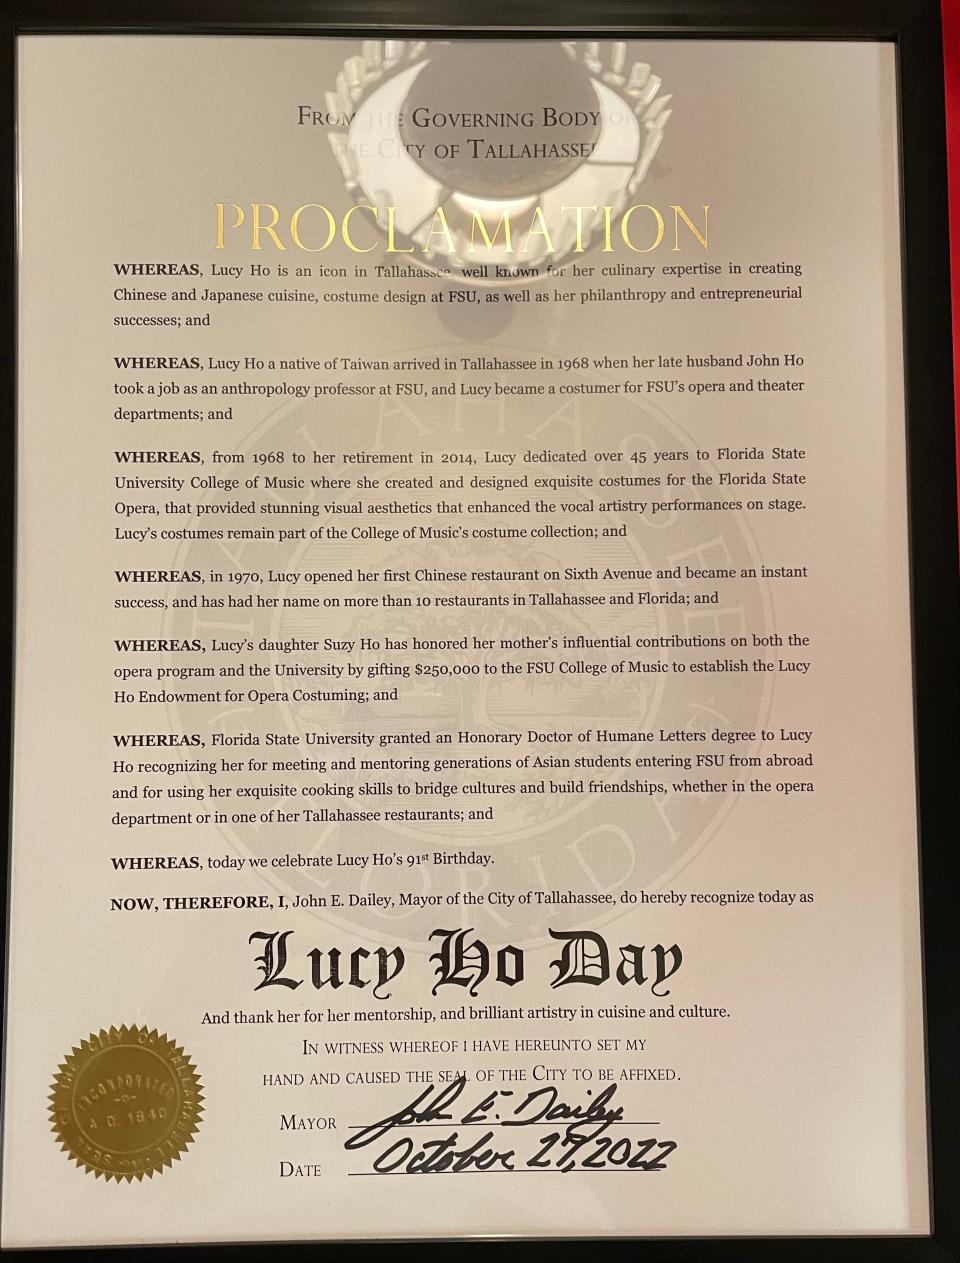 Mayor John Dailey presented Lucy Ho with a proclamation announcing that Oct. 27, 2022, shall henceforth be known in Tallahassee as LUCY HO DAY in recognition of her ability to “bridge cultures and build friendships.”